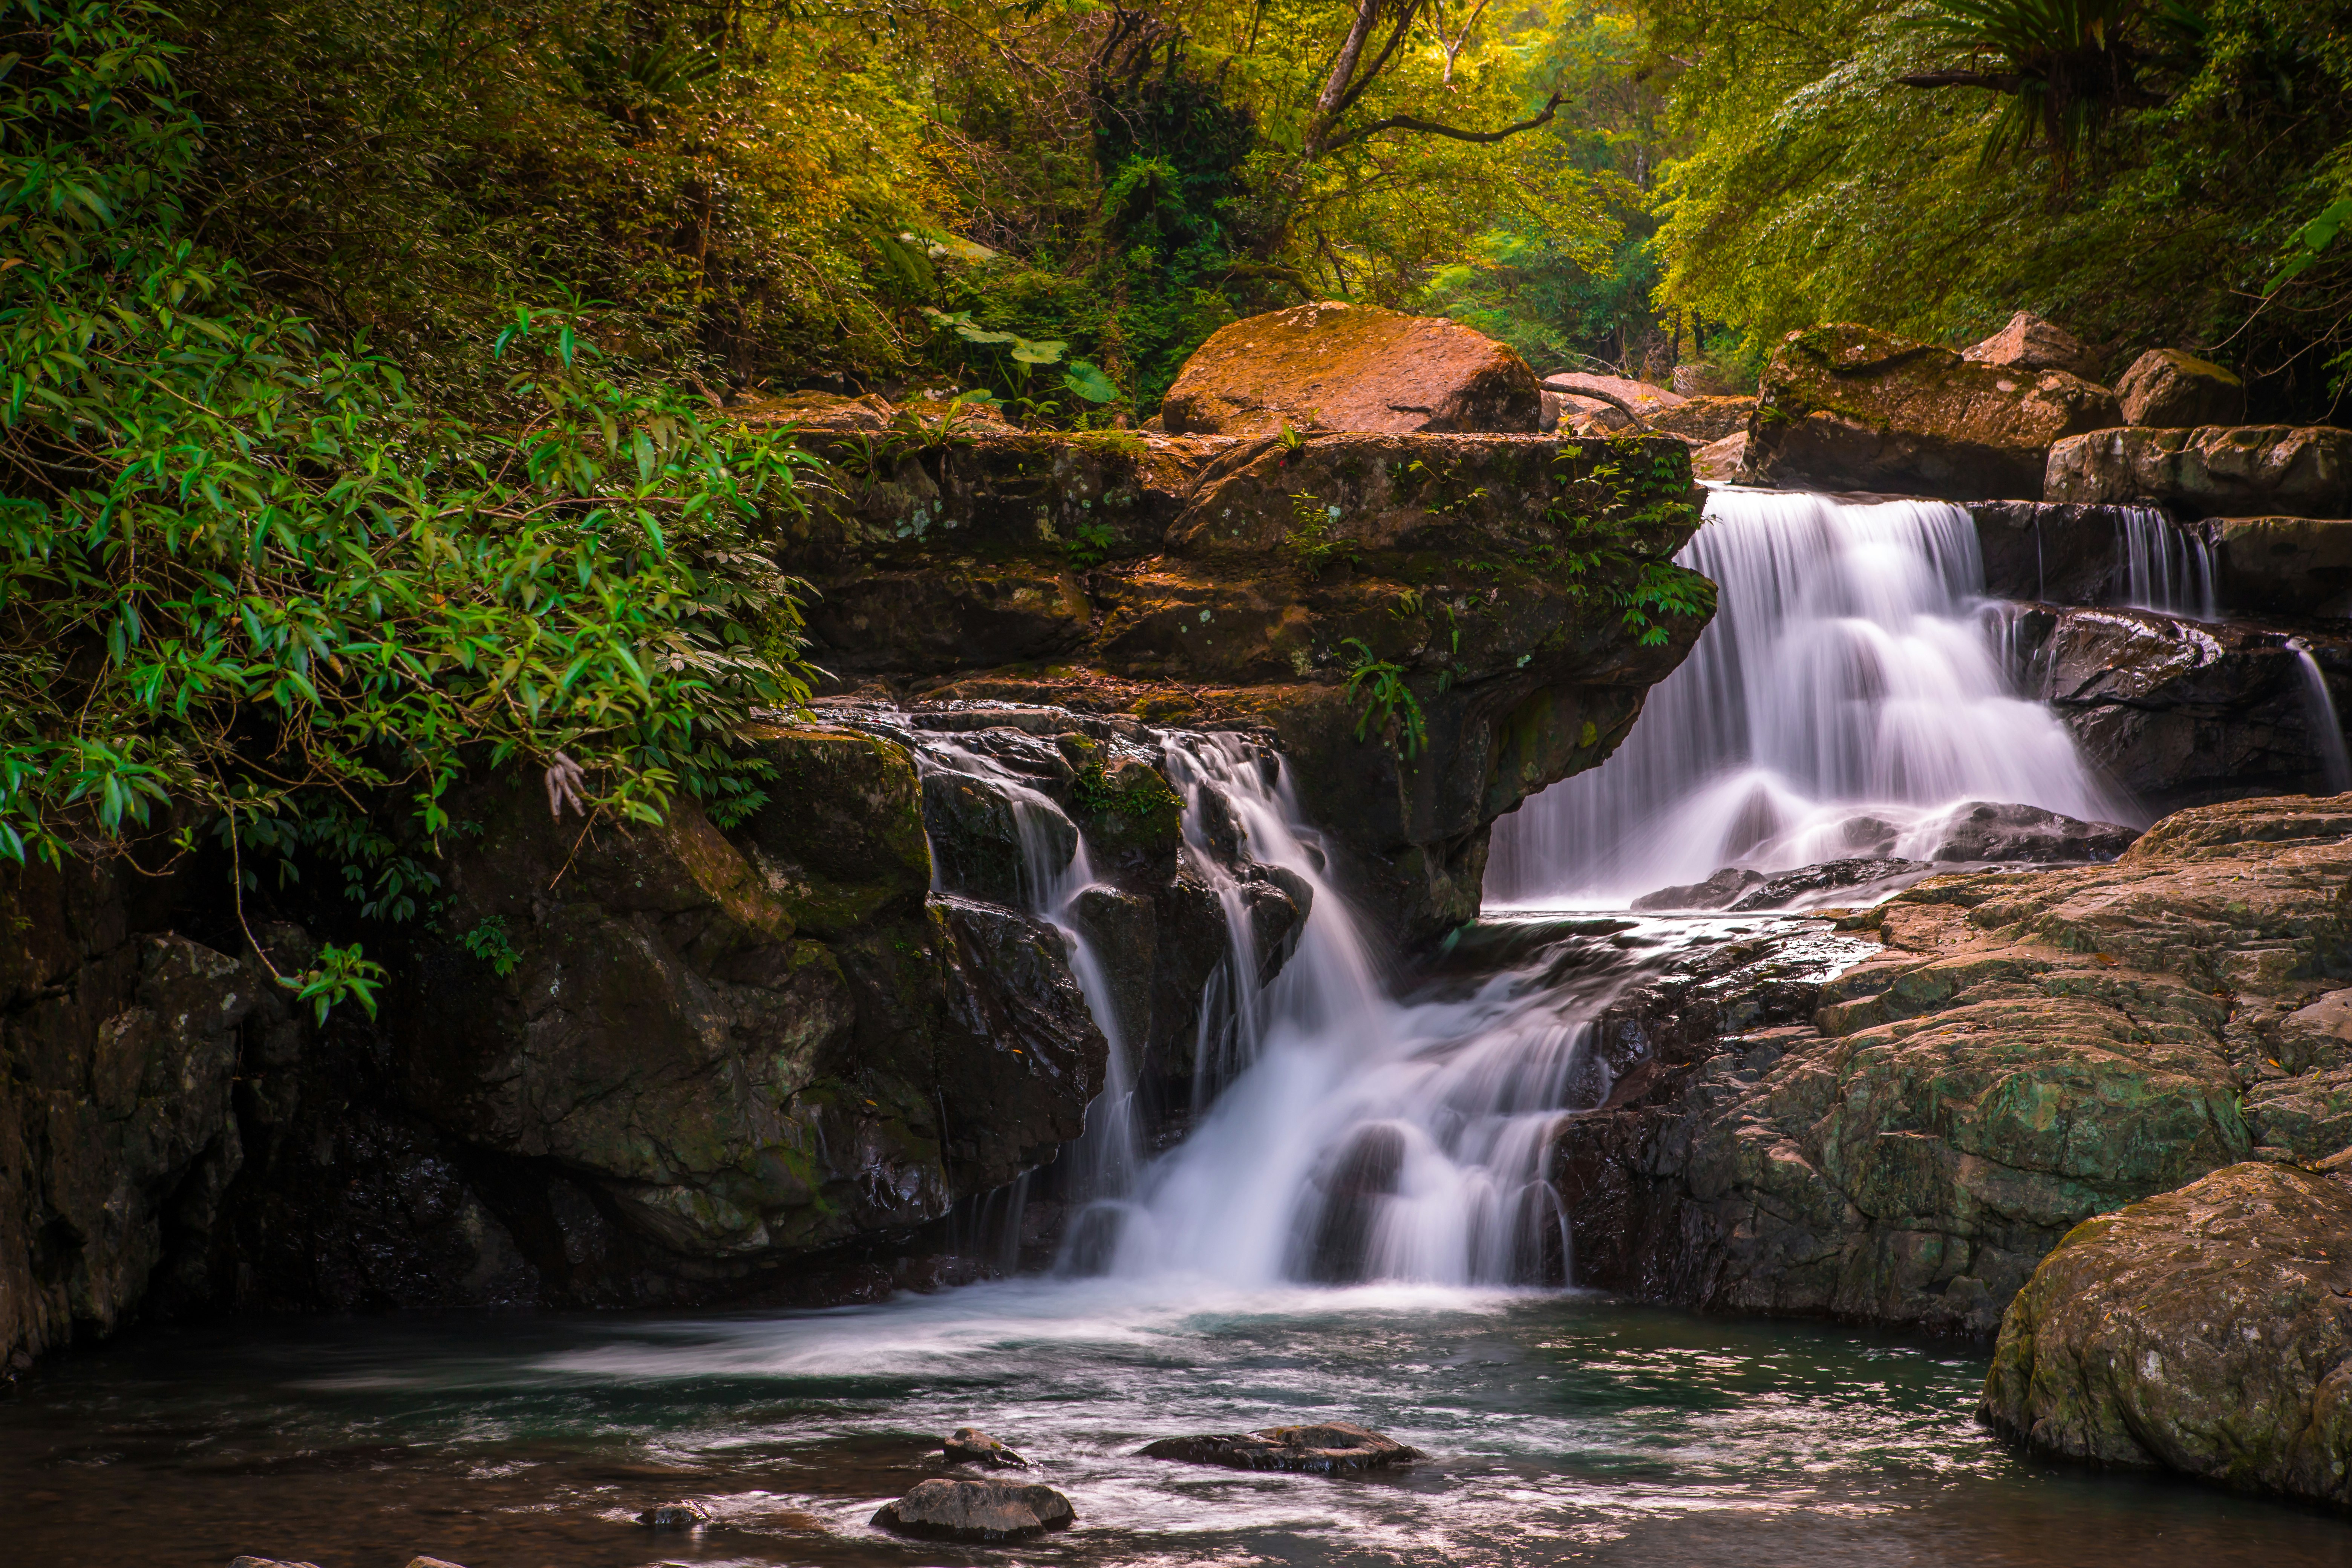 Full Moon Waterfall in Manyueyuan National Forest Recreation Area near Taipei